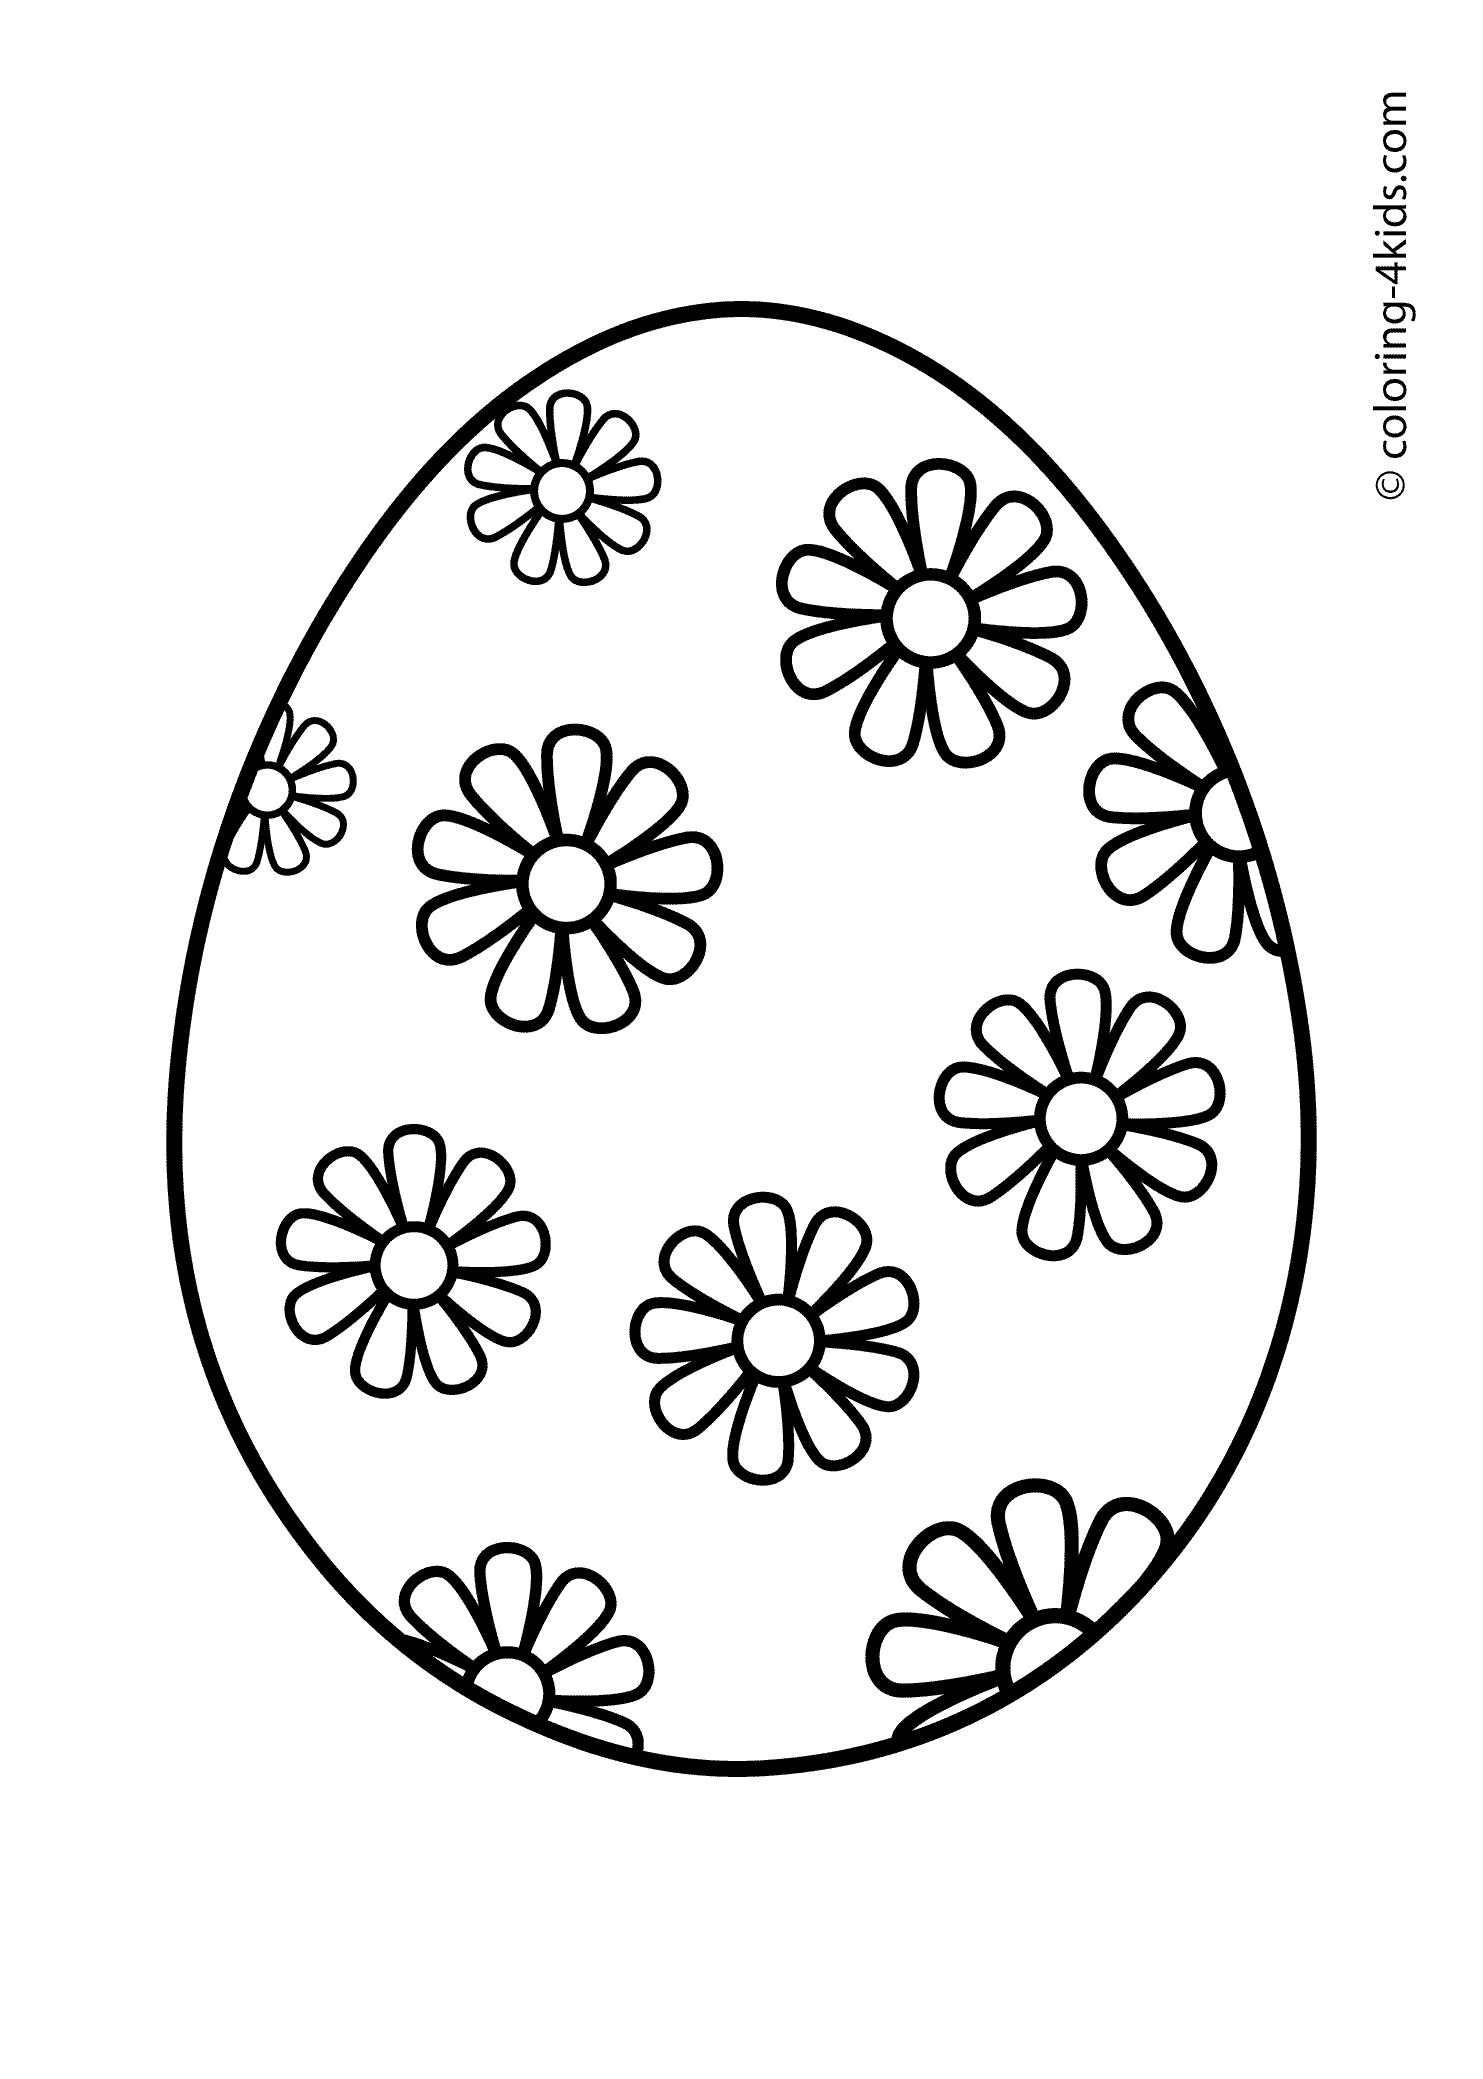 egg coloring sheet printable easter egg coloring pages for kids cool2bkids coloring sheet egg 